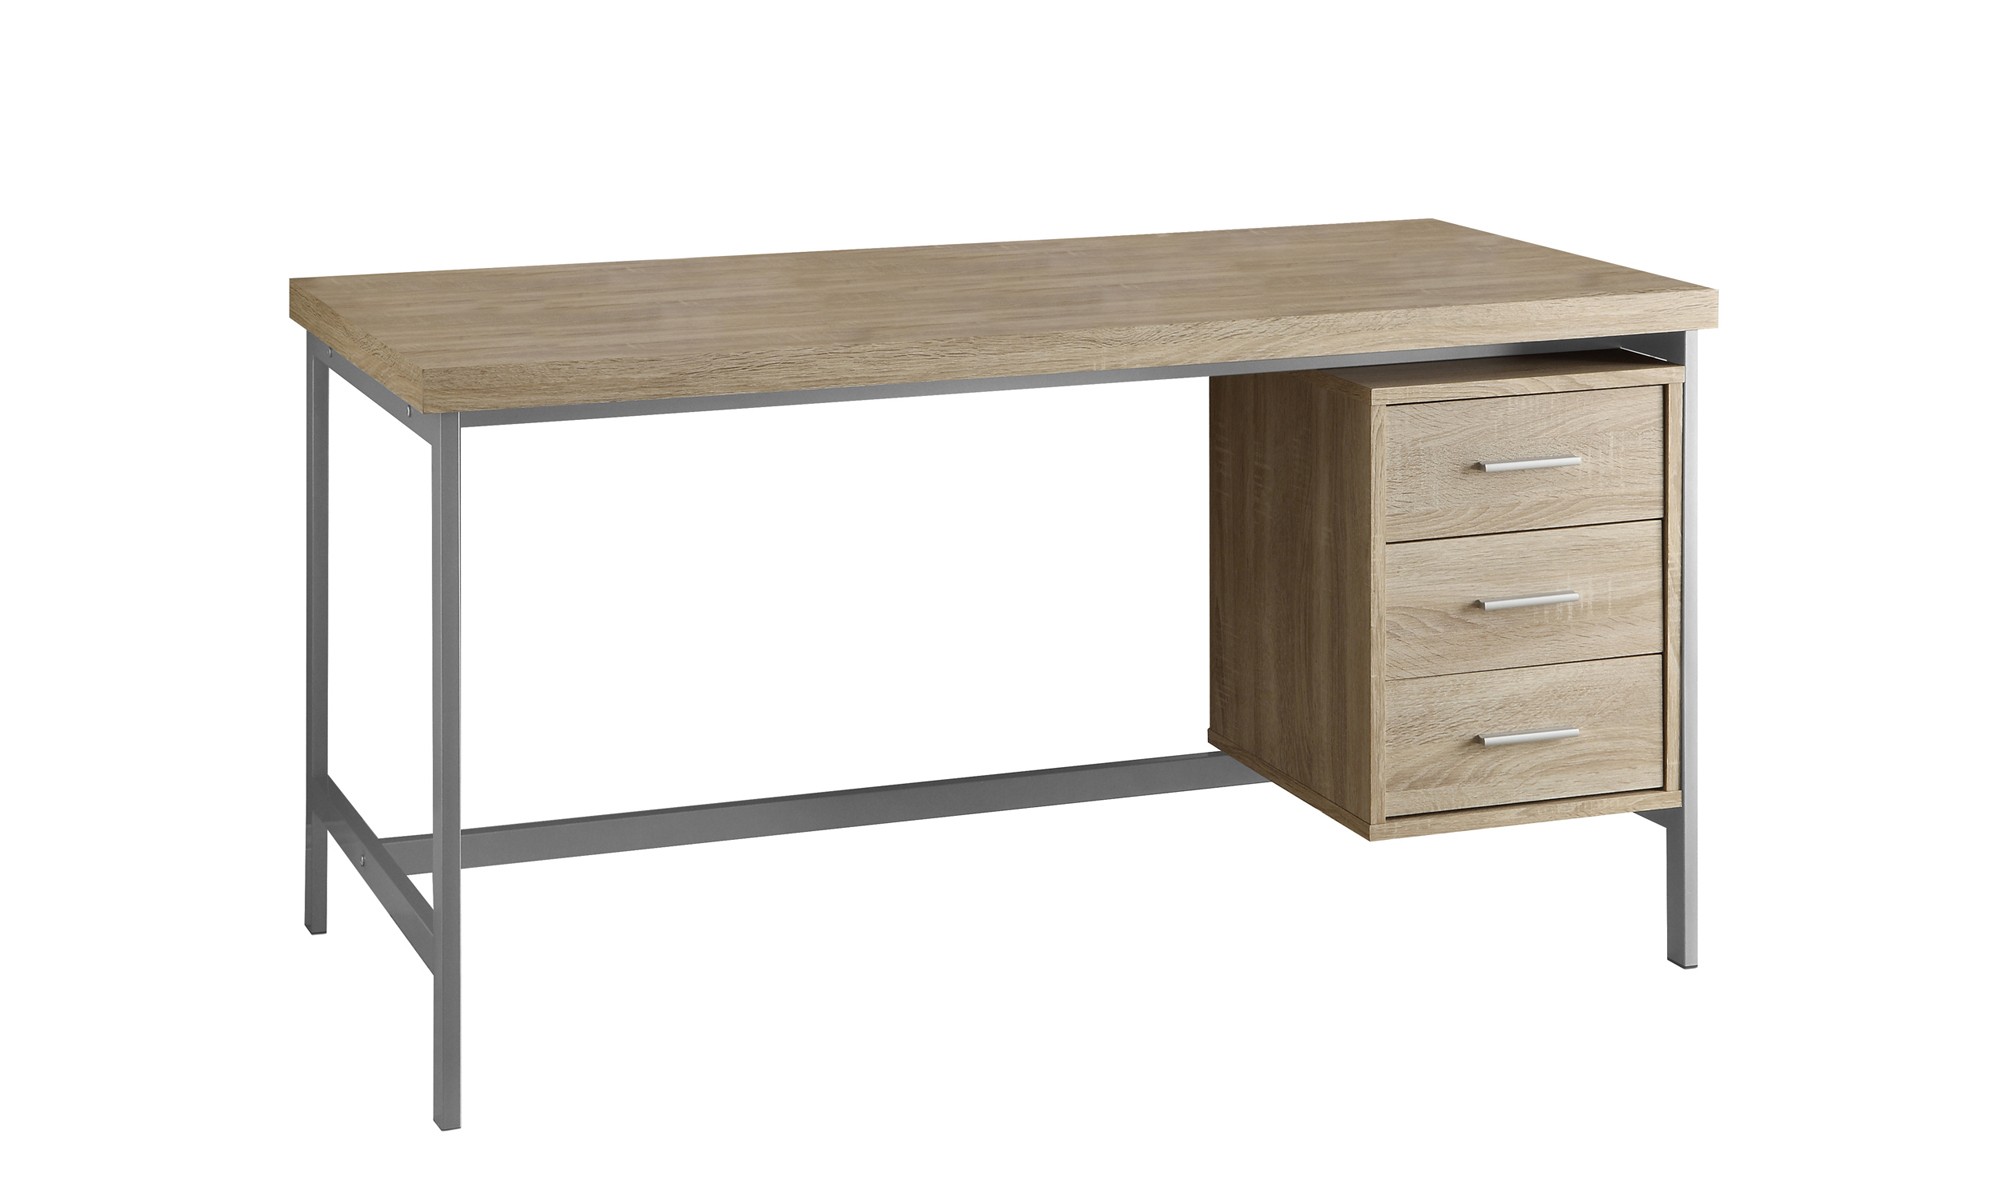 60" 3 Drawer Natural Reclaimed Wood-Look Hollow-Core Desk, Natural With Silver Metal